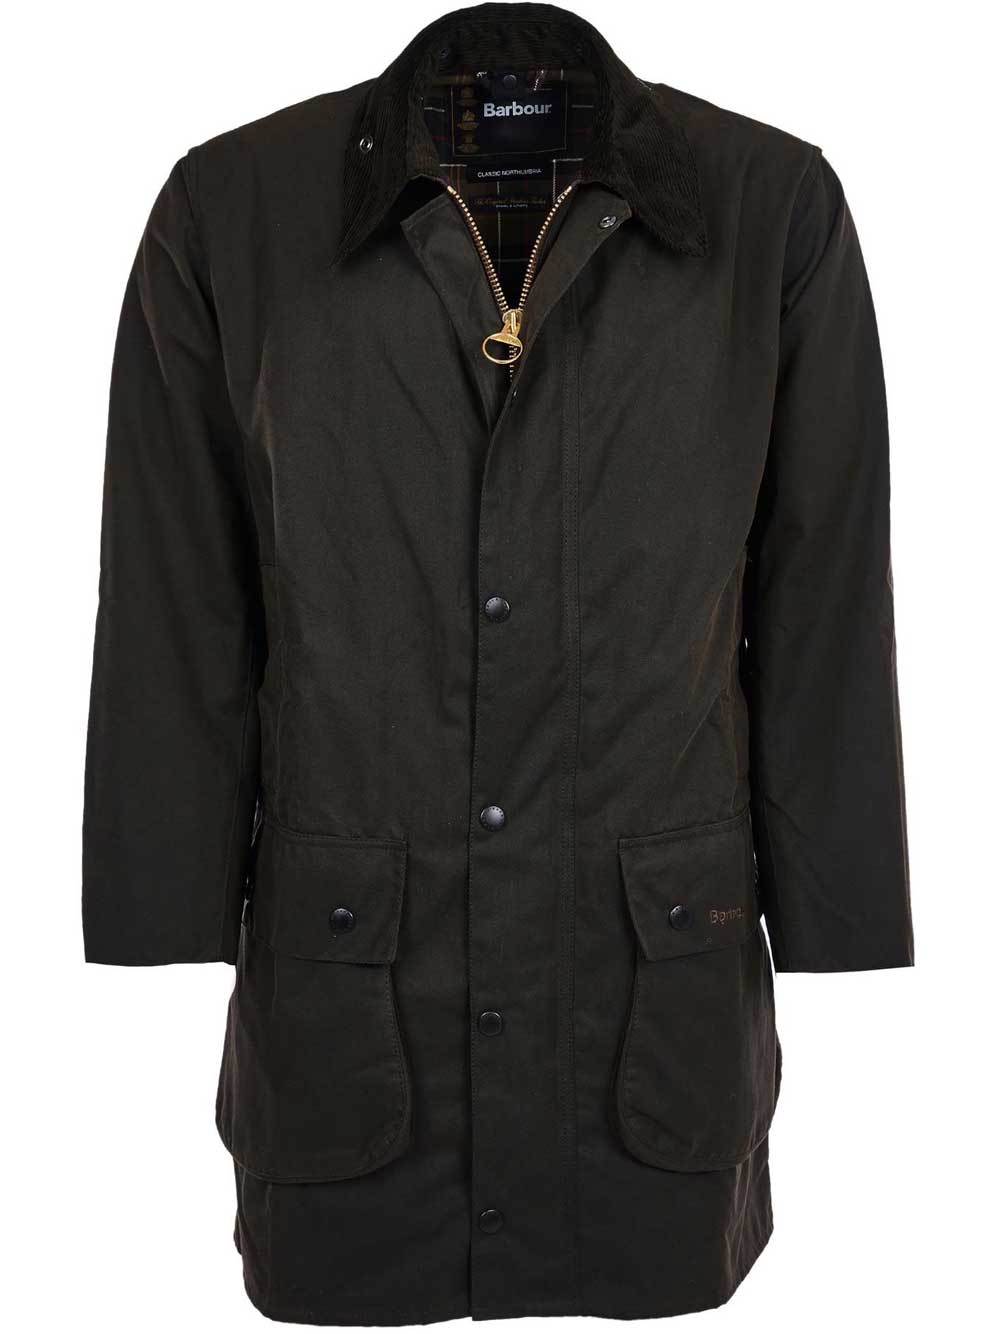 BARBOUR Wax Jacket - Mens Northumbria Classic 8oz Sylkoil - Olive